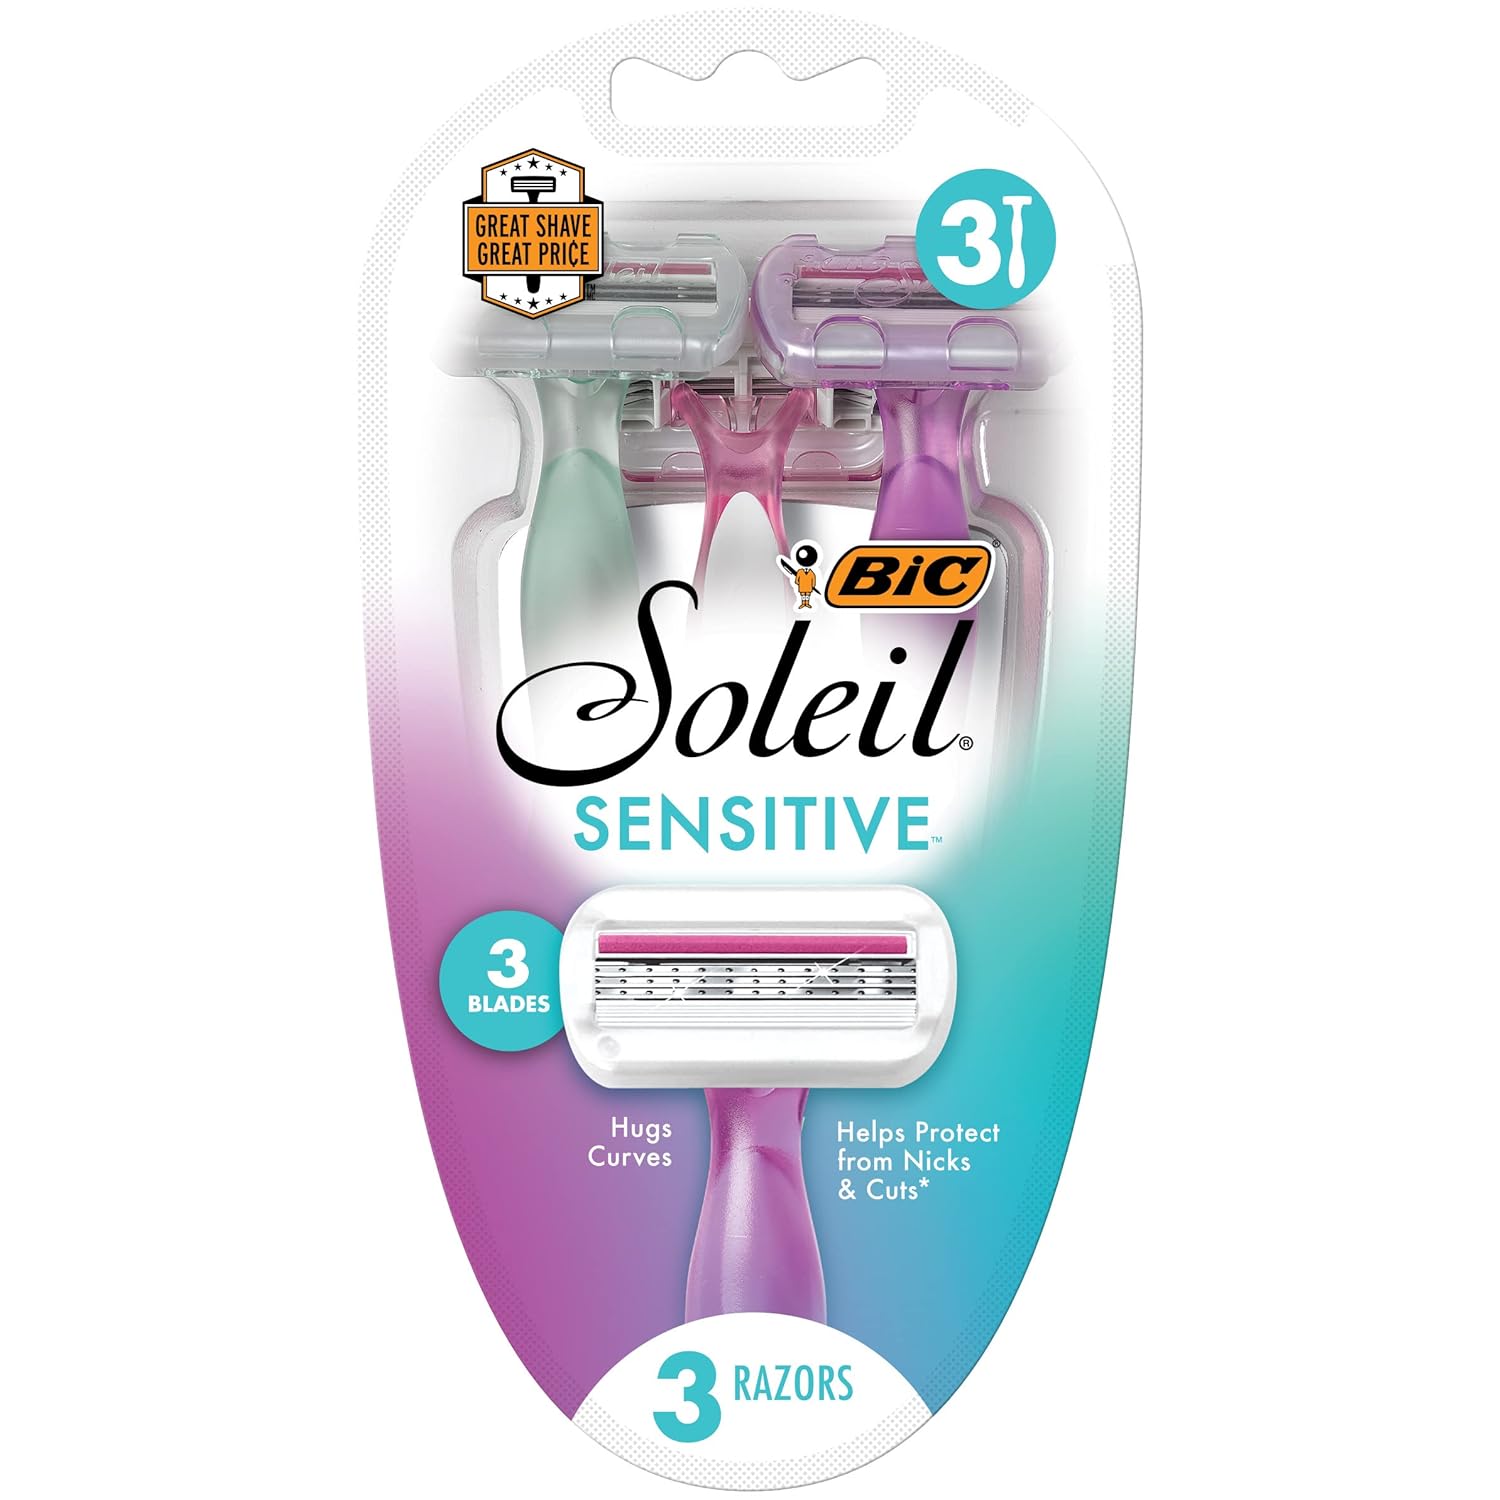 BIC Soleil Sensitive Women' Disposable Razors, 3 Blades With Moisture Strip For a Silky Smooth Shave, 6 Piece Razor Set, 3 Count (Pack of 2)